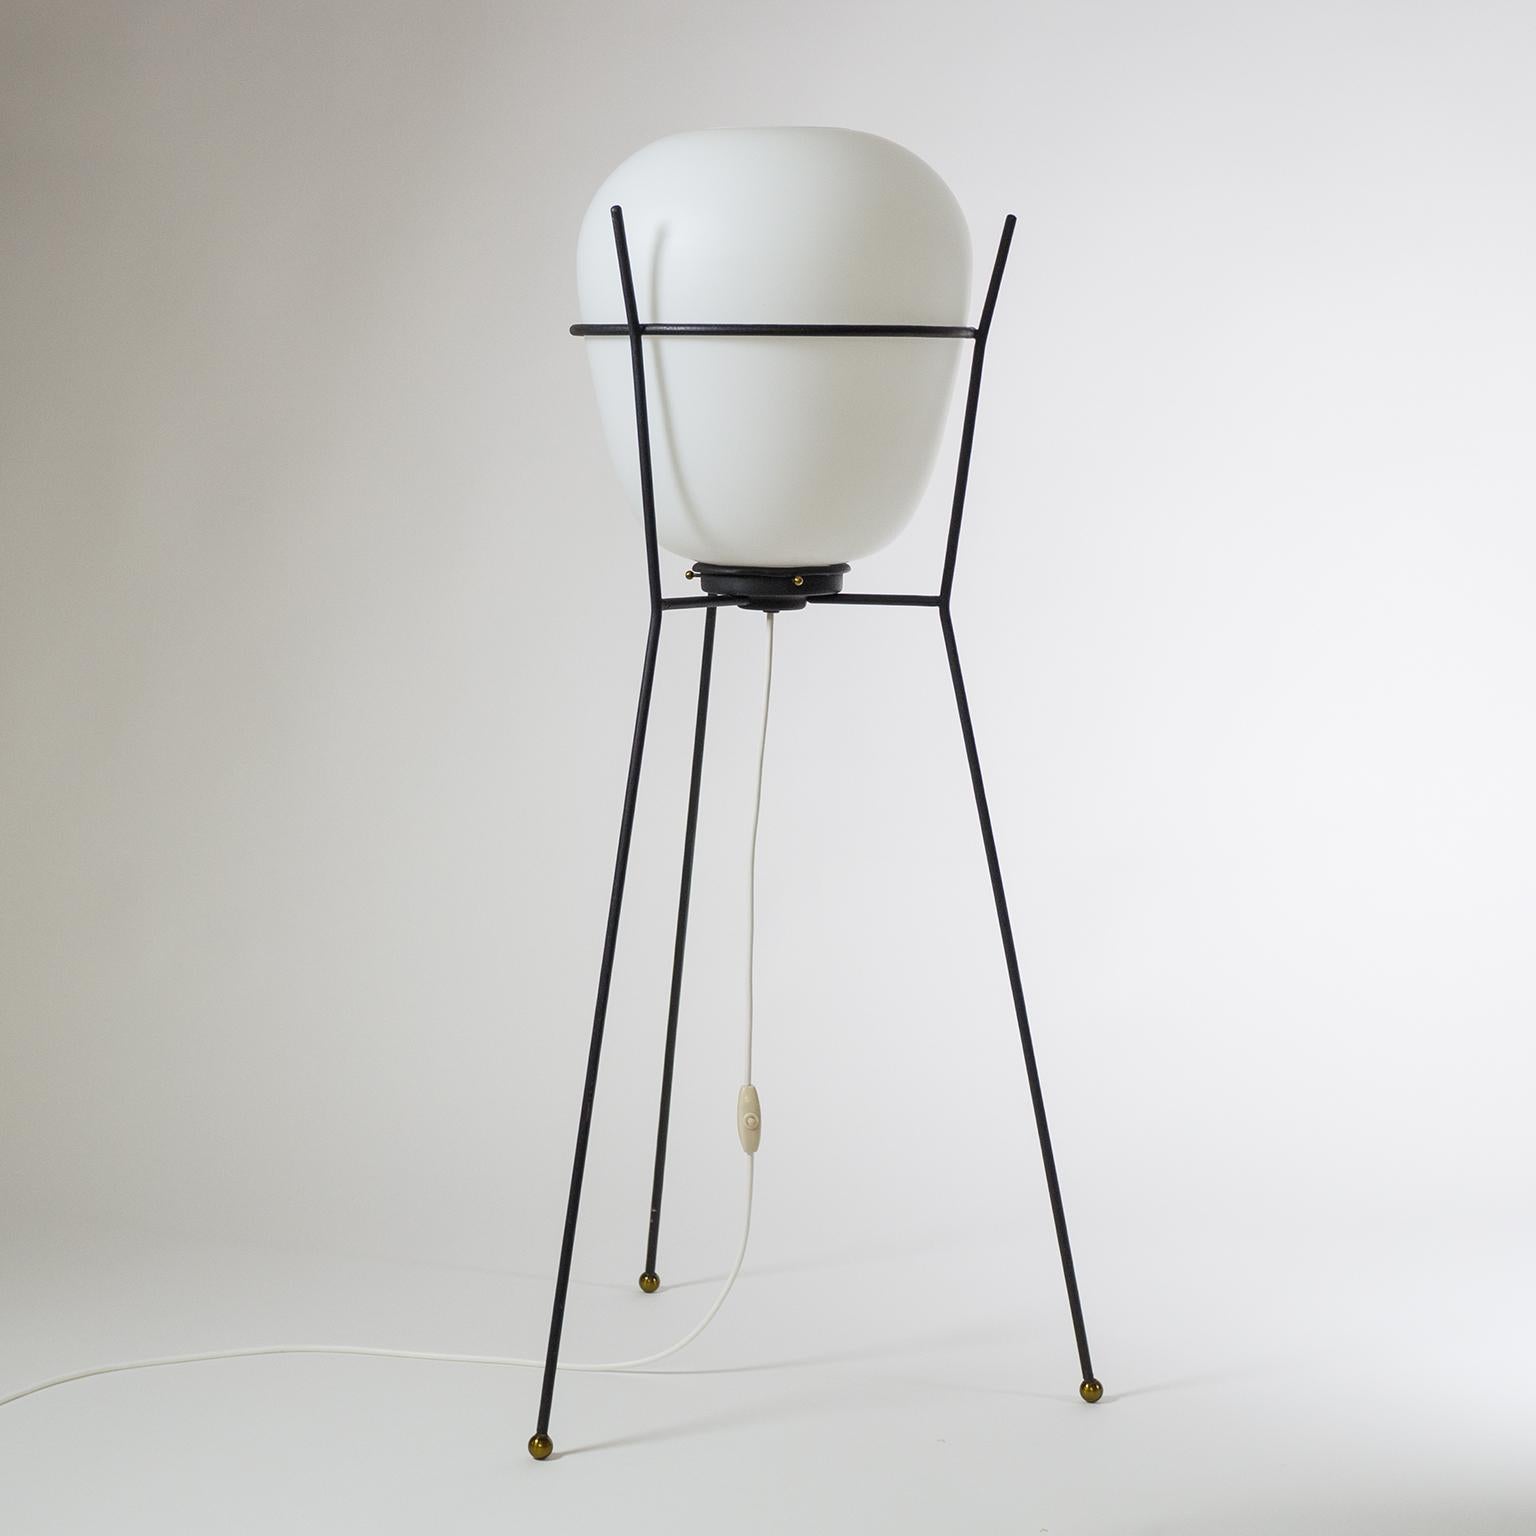 Modernist Stilnovo tripod floor lamp 1950s. A sculptural minimalist blackened steel structure with brass details holds a large oval satin glass (triplex opal) diffuser. One original brass and ceramic E27 socket with new wiring.